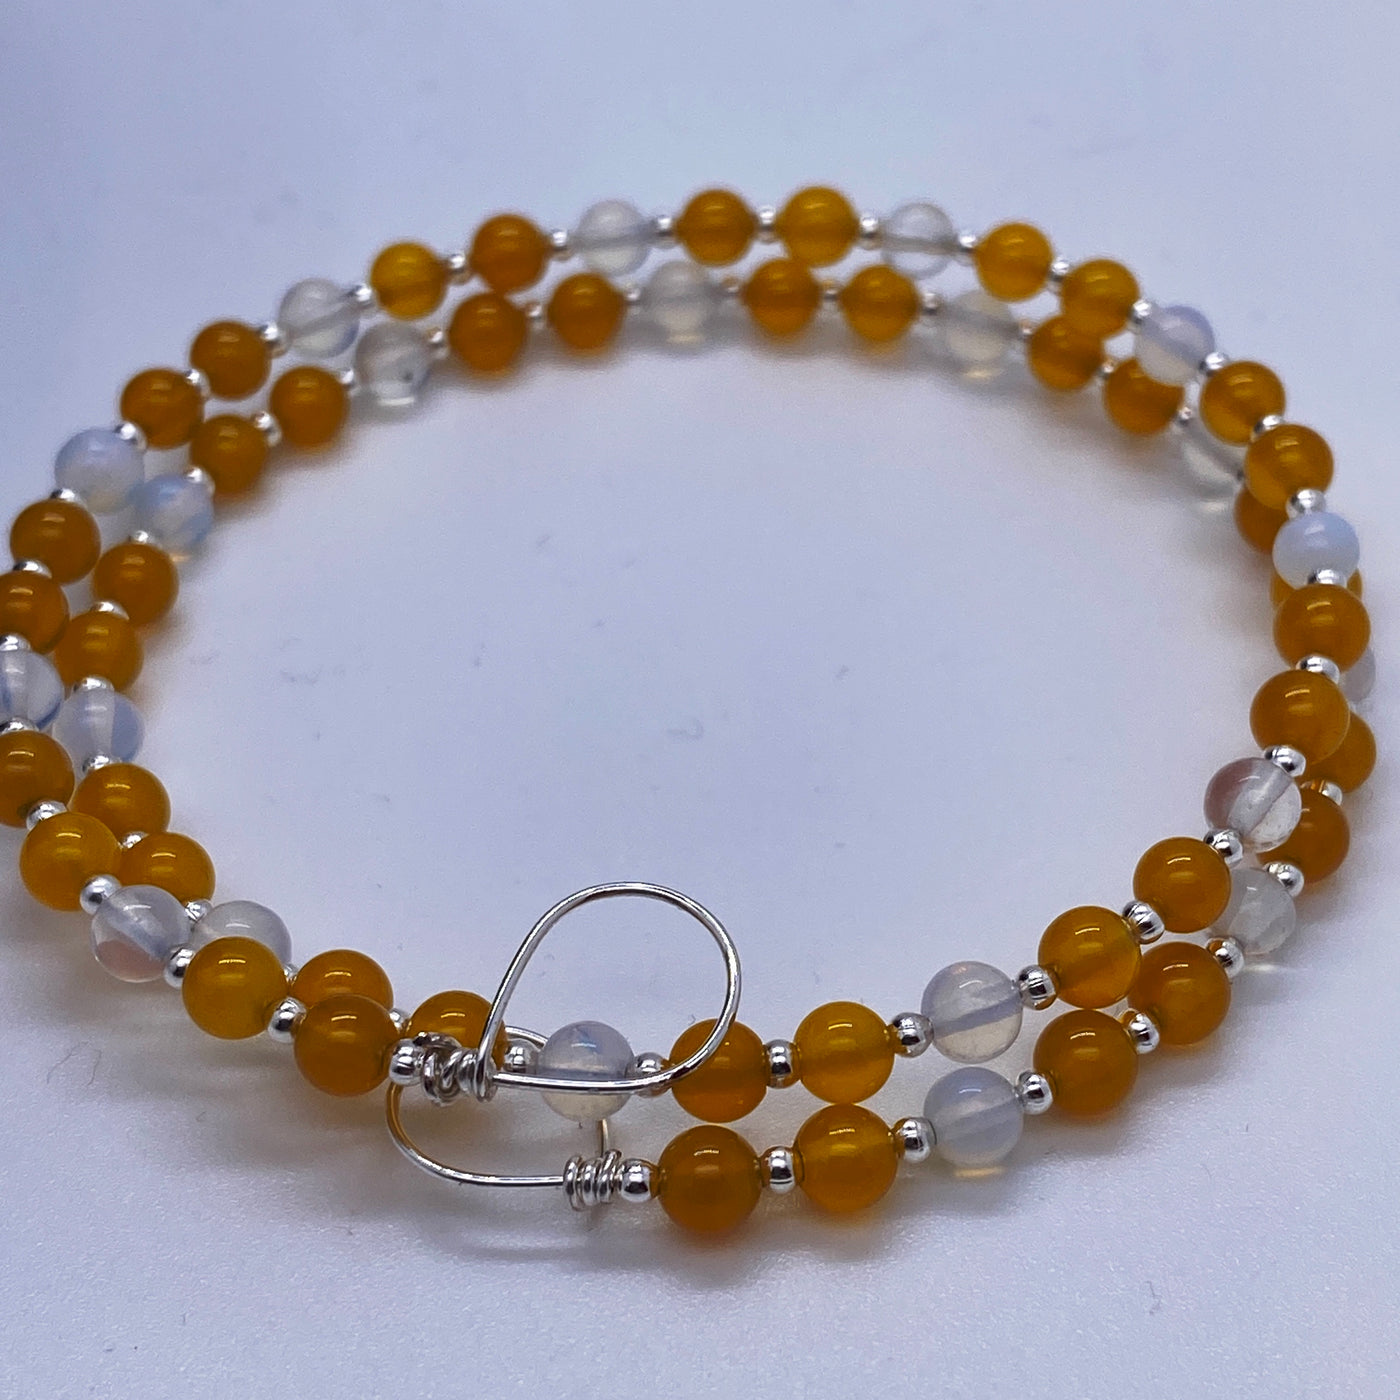 Yellow agate and opalite 4 mm small pearls bracelet.